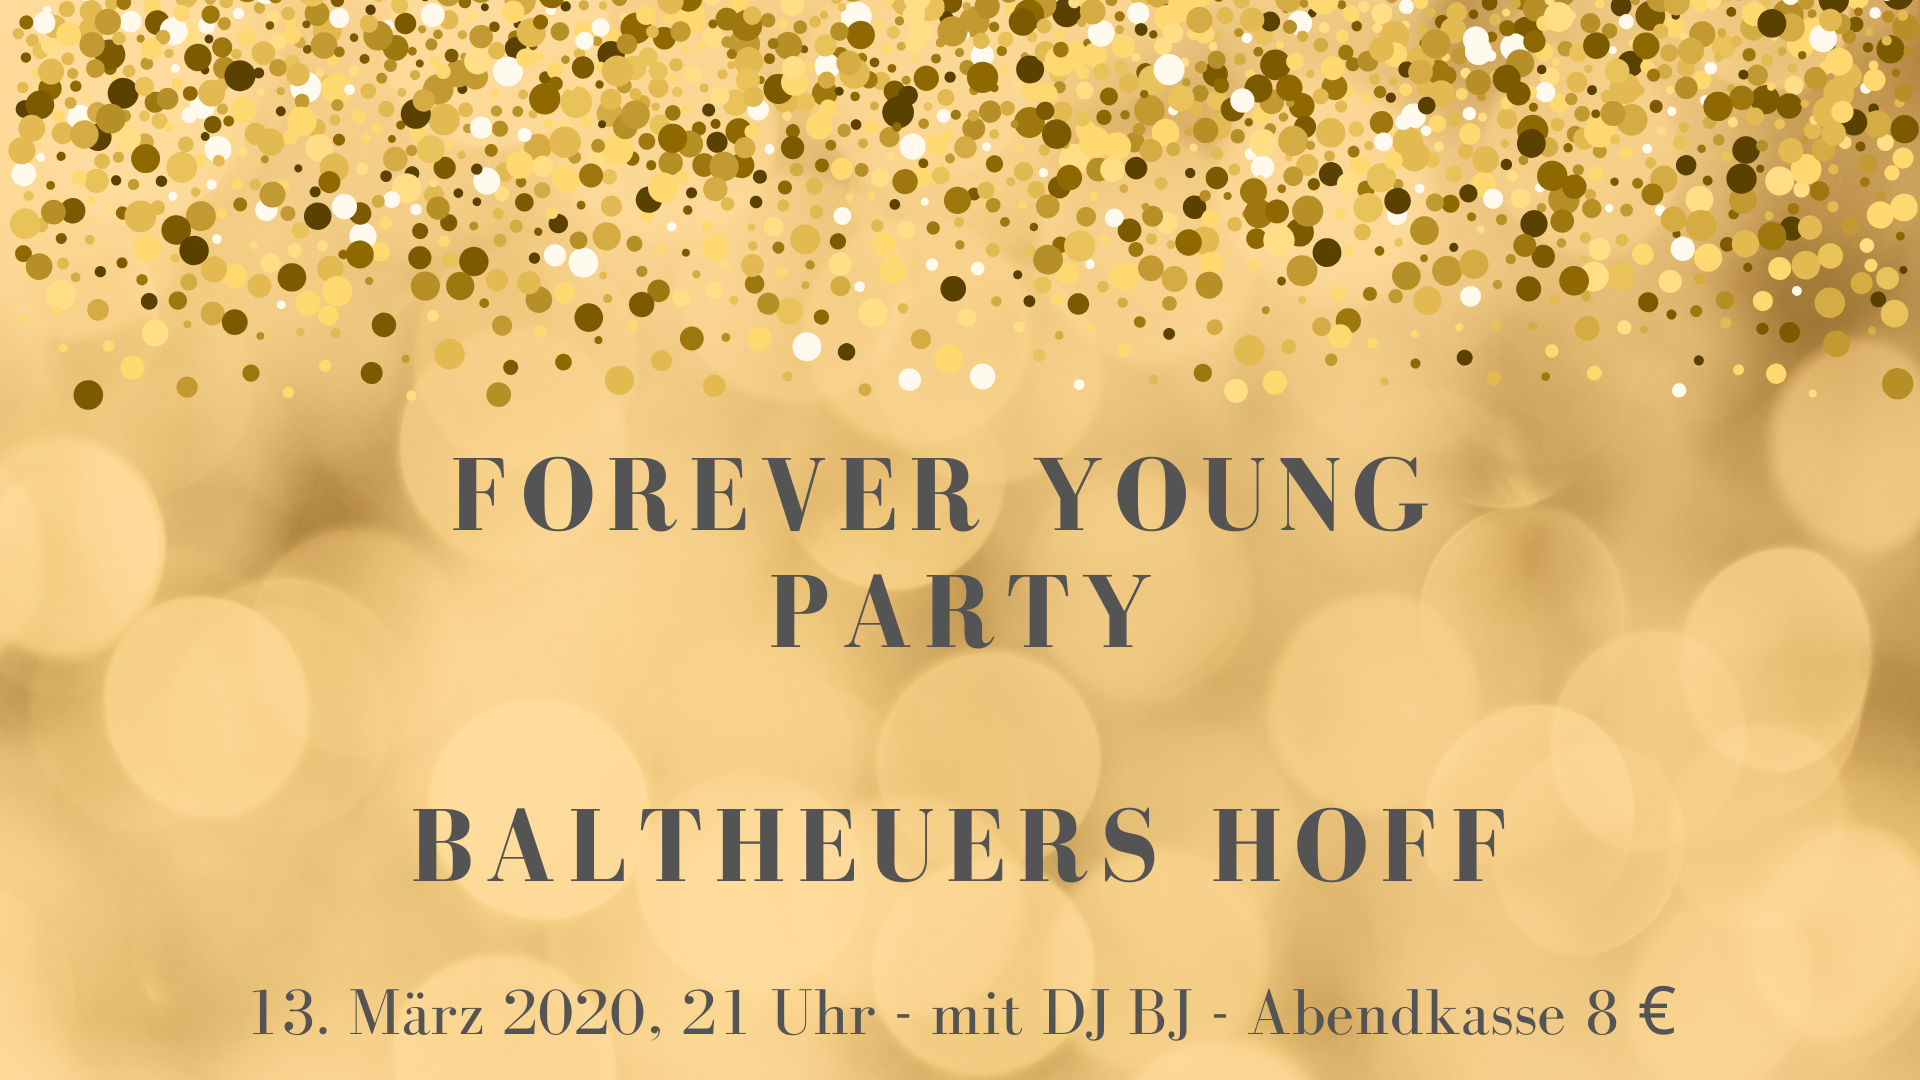 Forever Young Party 13. März 2020